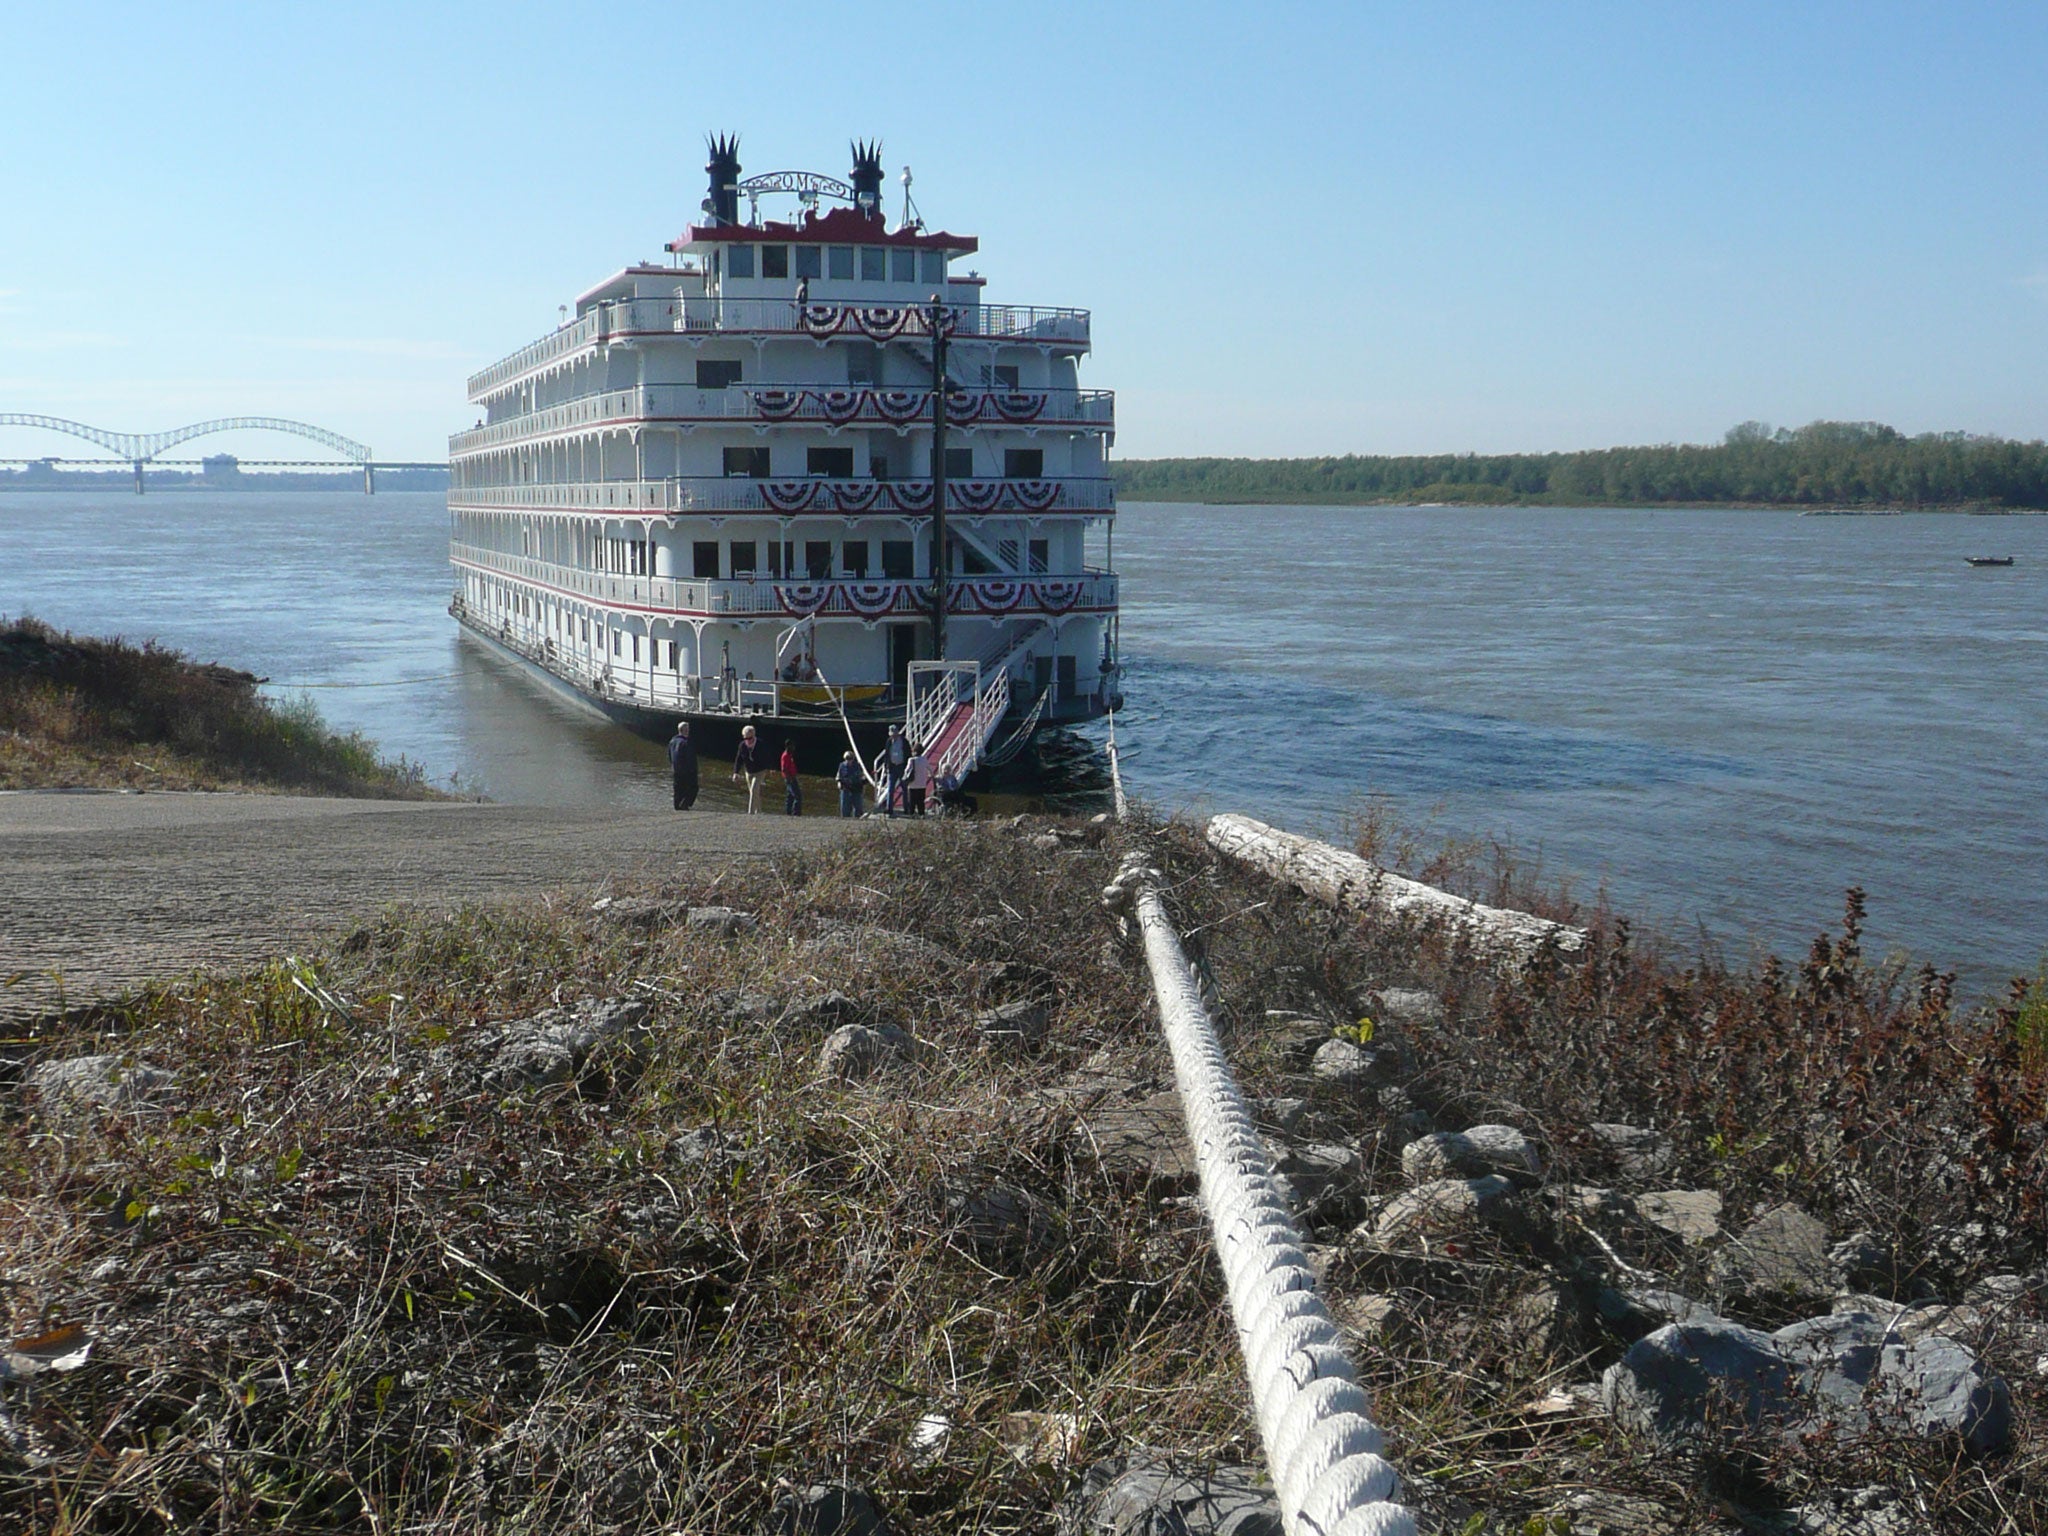 The latest Mississippi paddle boat takes in historic towns and literary landmarks at a leisurely pace